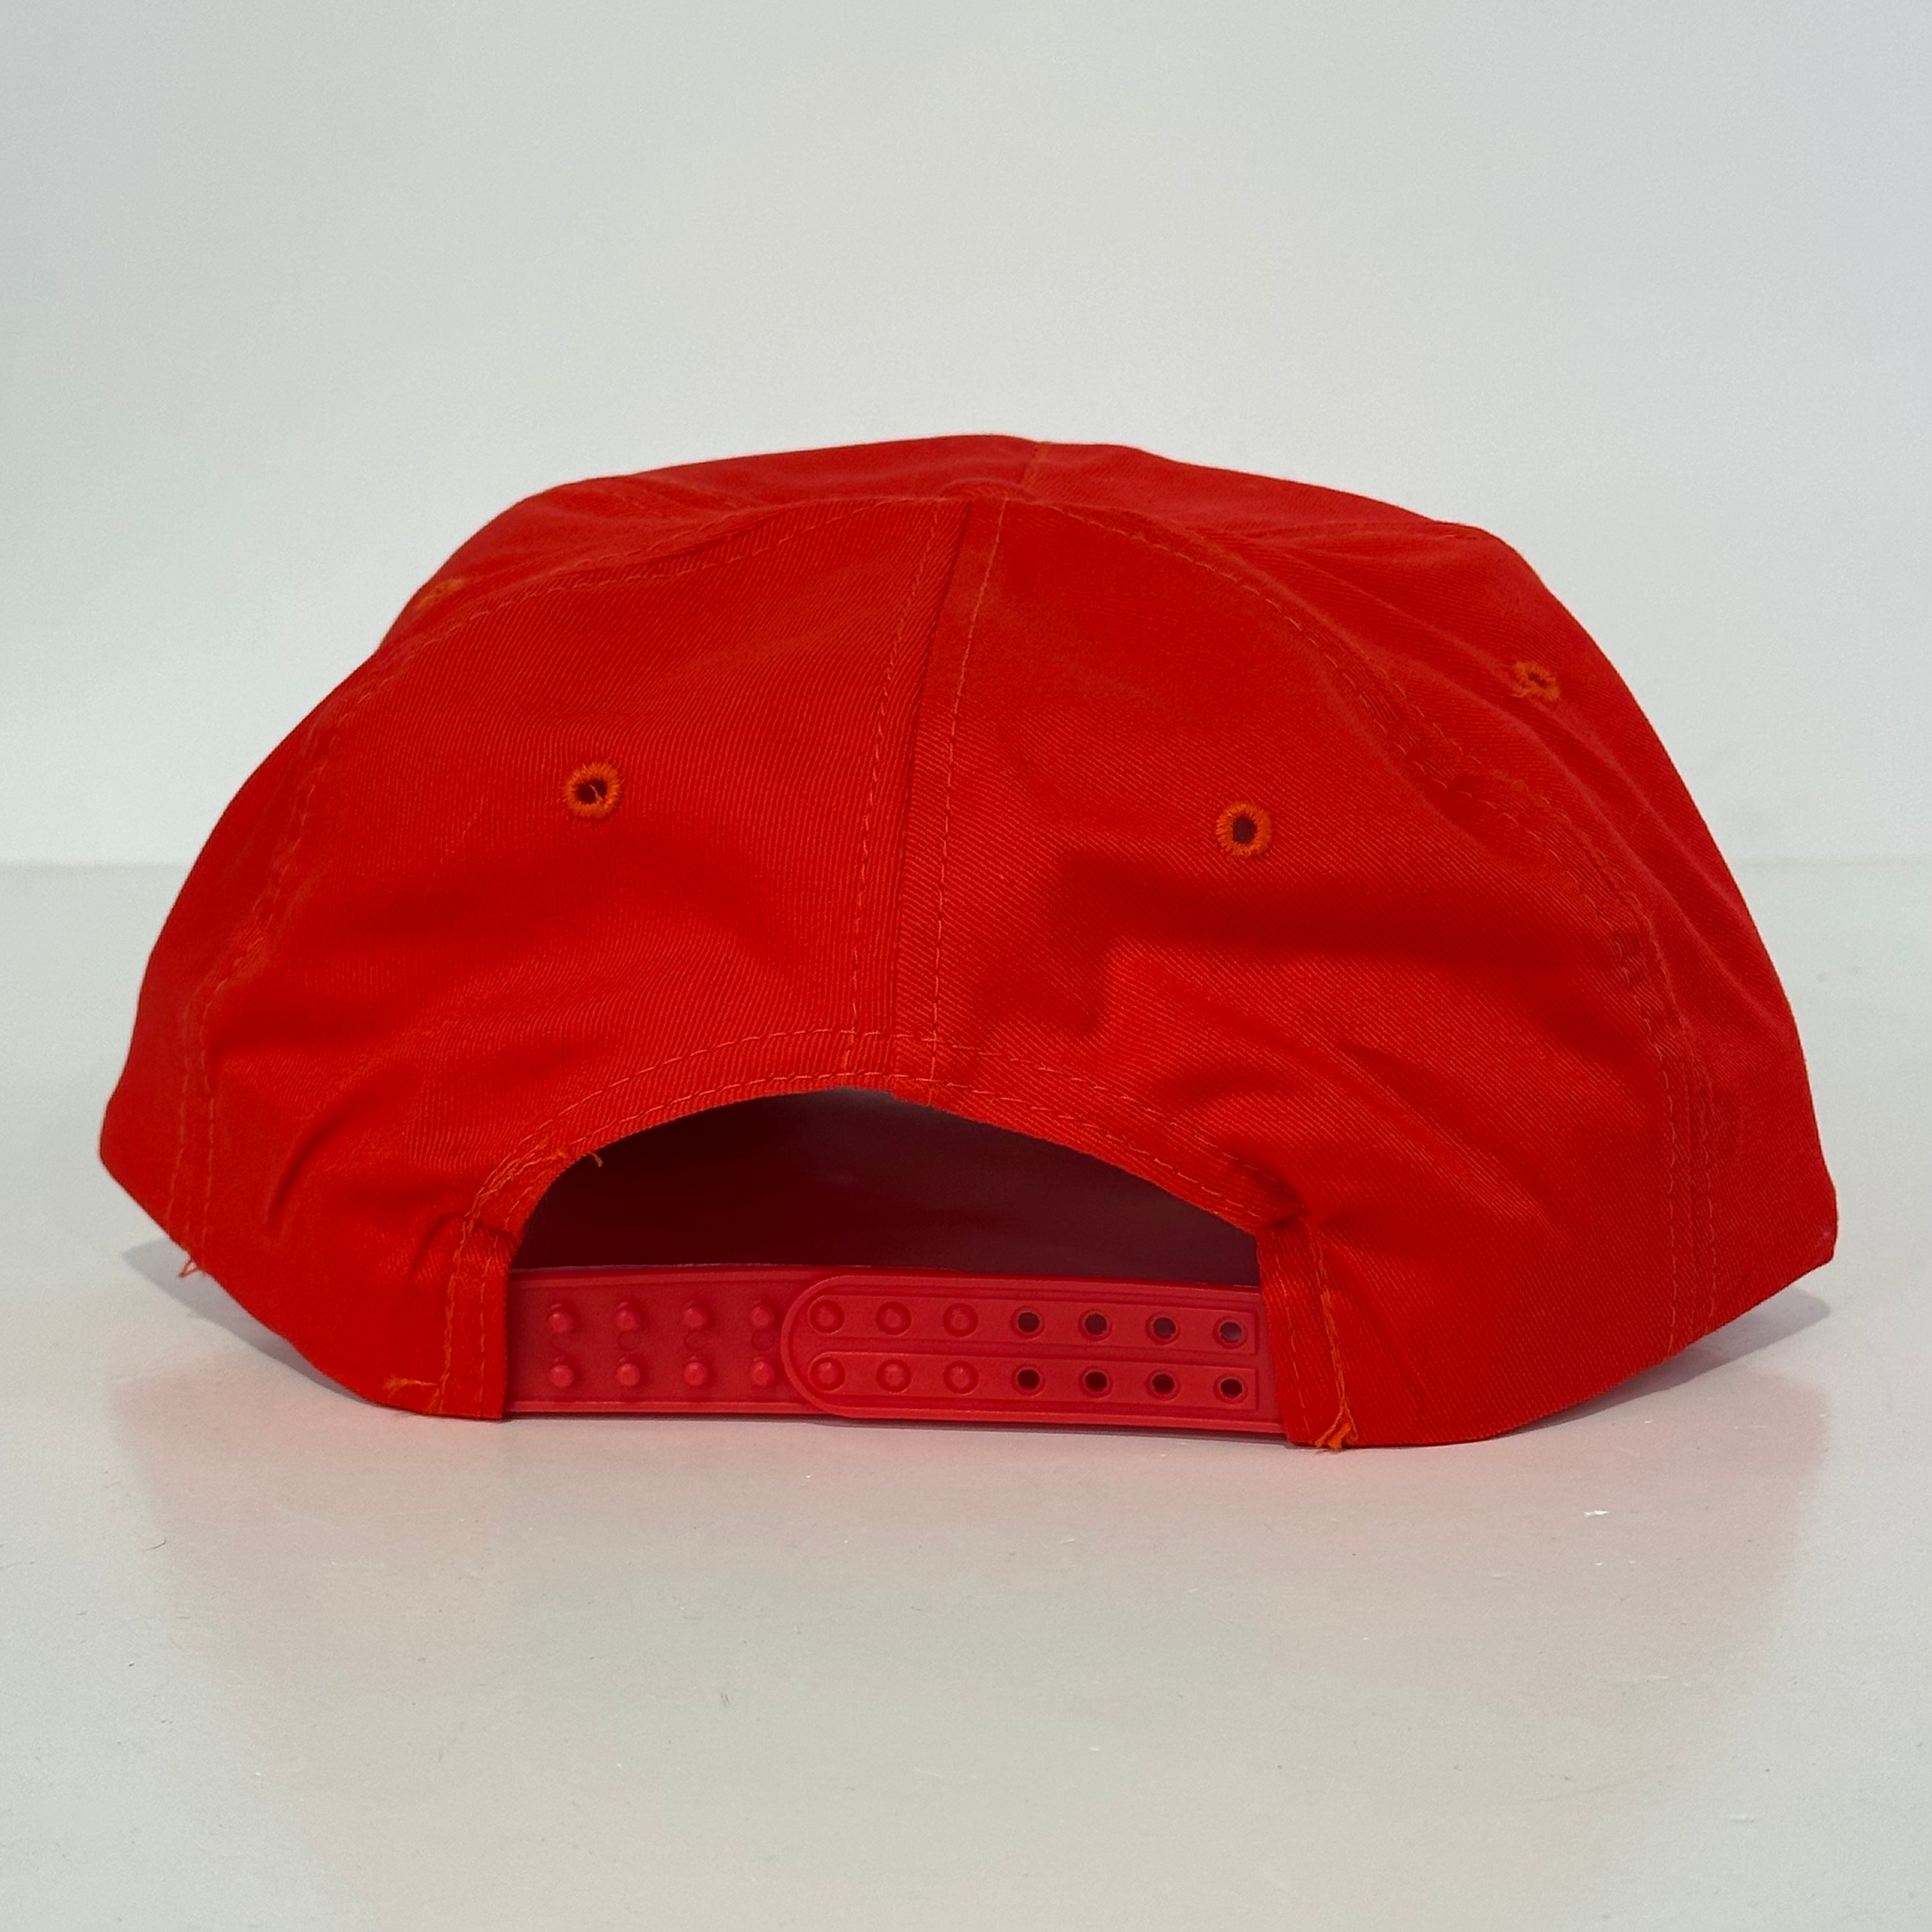 The Devils Den Gentlemen's Club on a red rope SnapBack Hat Cap Collab – Old  School Hats